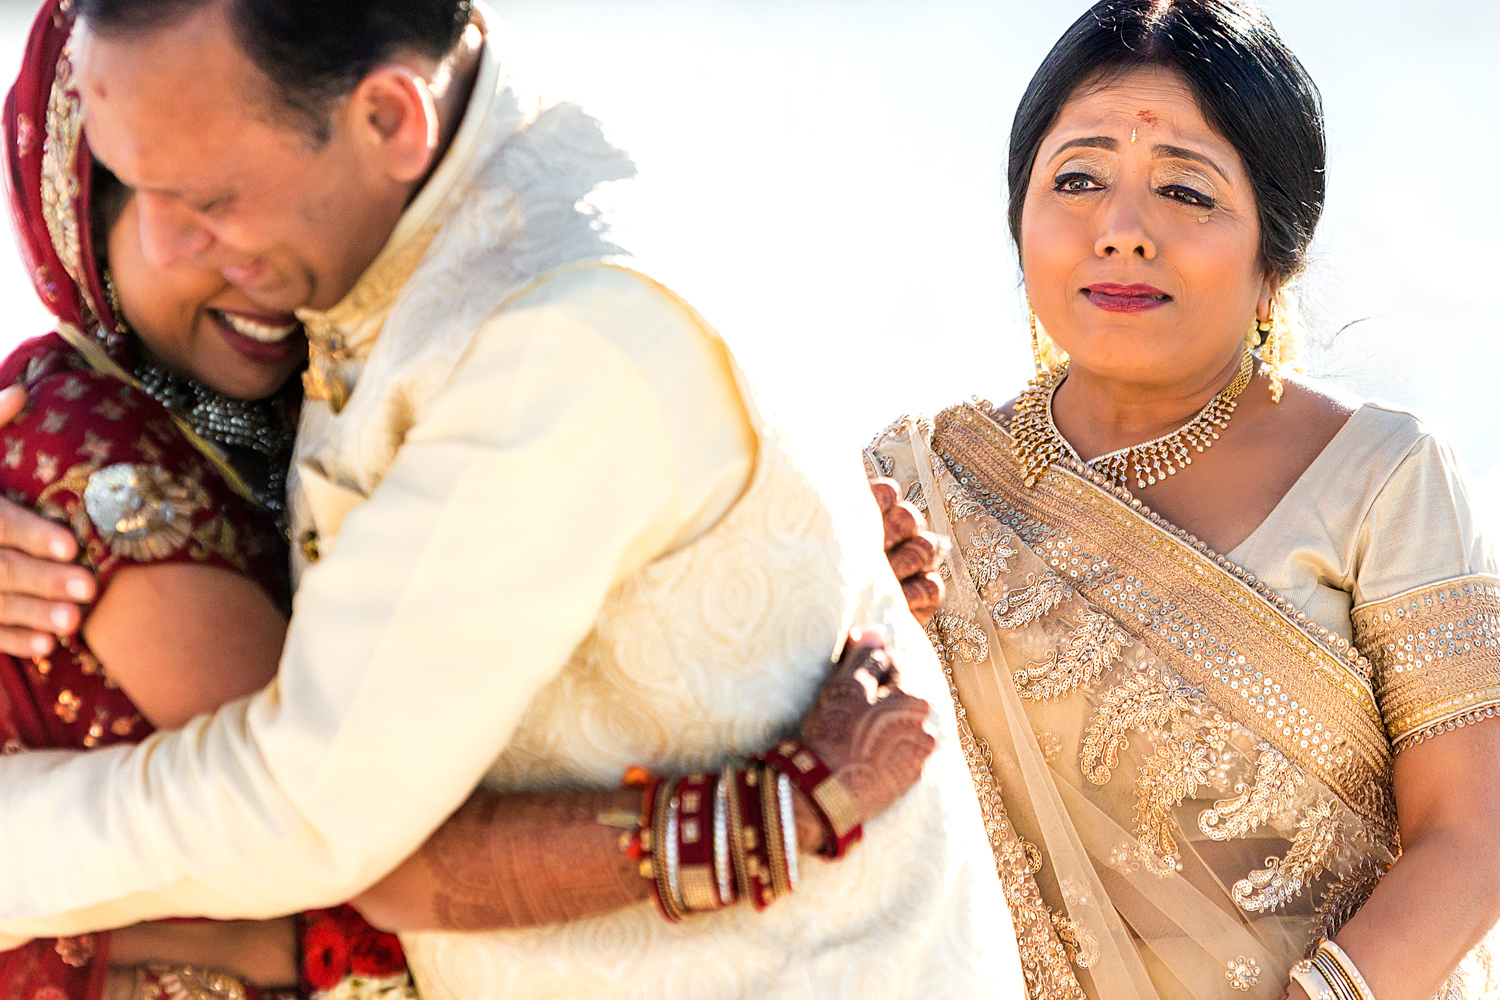 This was an Indian Hindu wedding on the Eastern Shore, This was the parents' giving away their daughter in an emotional embrace, Dad is hugging his daughter and you can see a tear streaming down her mother's face in the background, Procopio Photography, best top Washington DC photographer, best top Maryland photographer, best top Virginia photographer, best top DMV photographer, best top wedding photographer, best top commercial photographer, best top portrait photographer, best top boudoir photographer, modern fine art portraits, dramatic, unique, different, bold, editorial, photojournalism, award winning photographer, published photographer, memorable images, be different, stand out